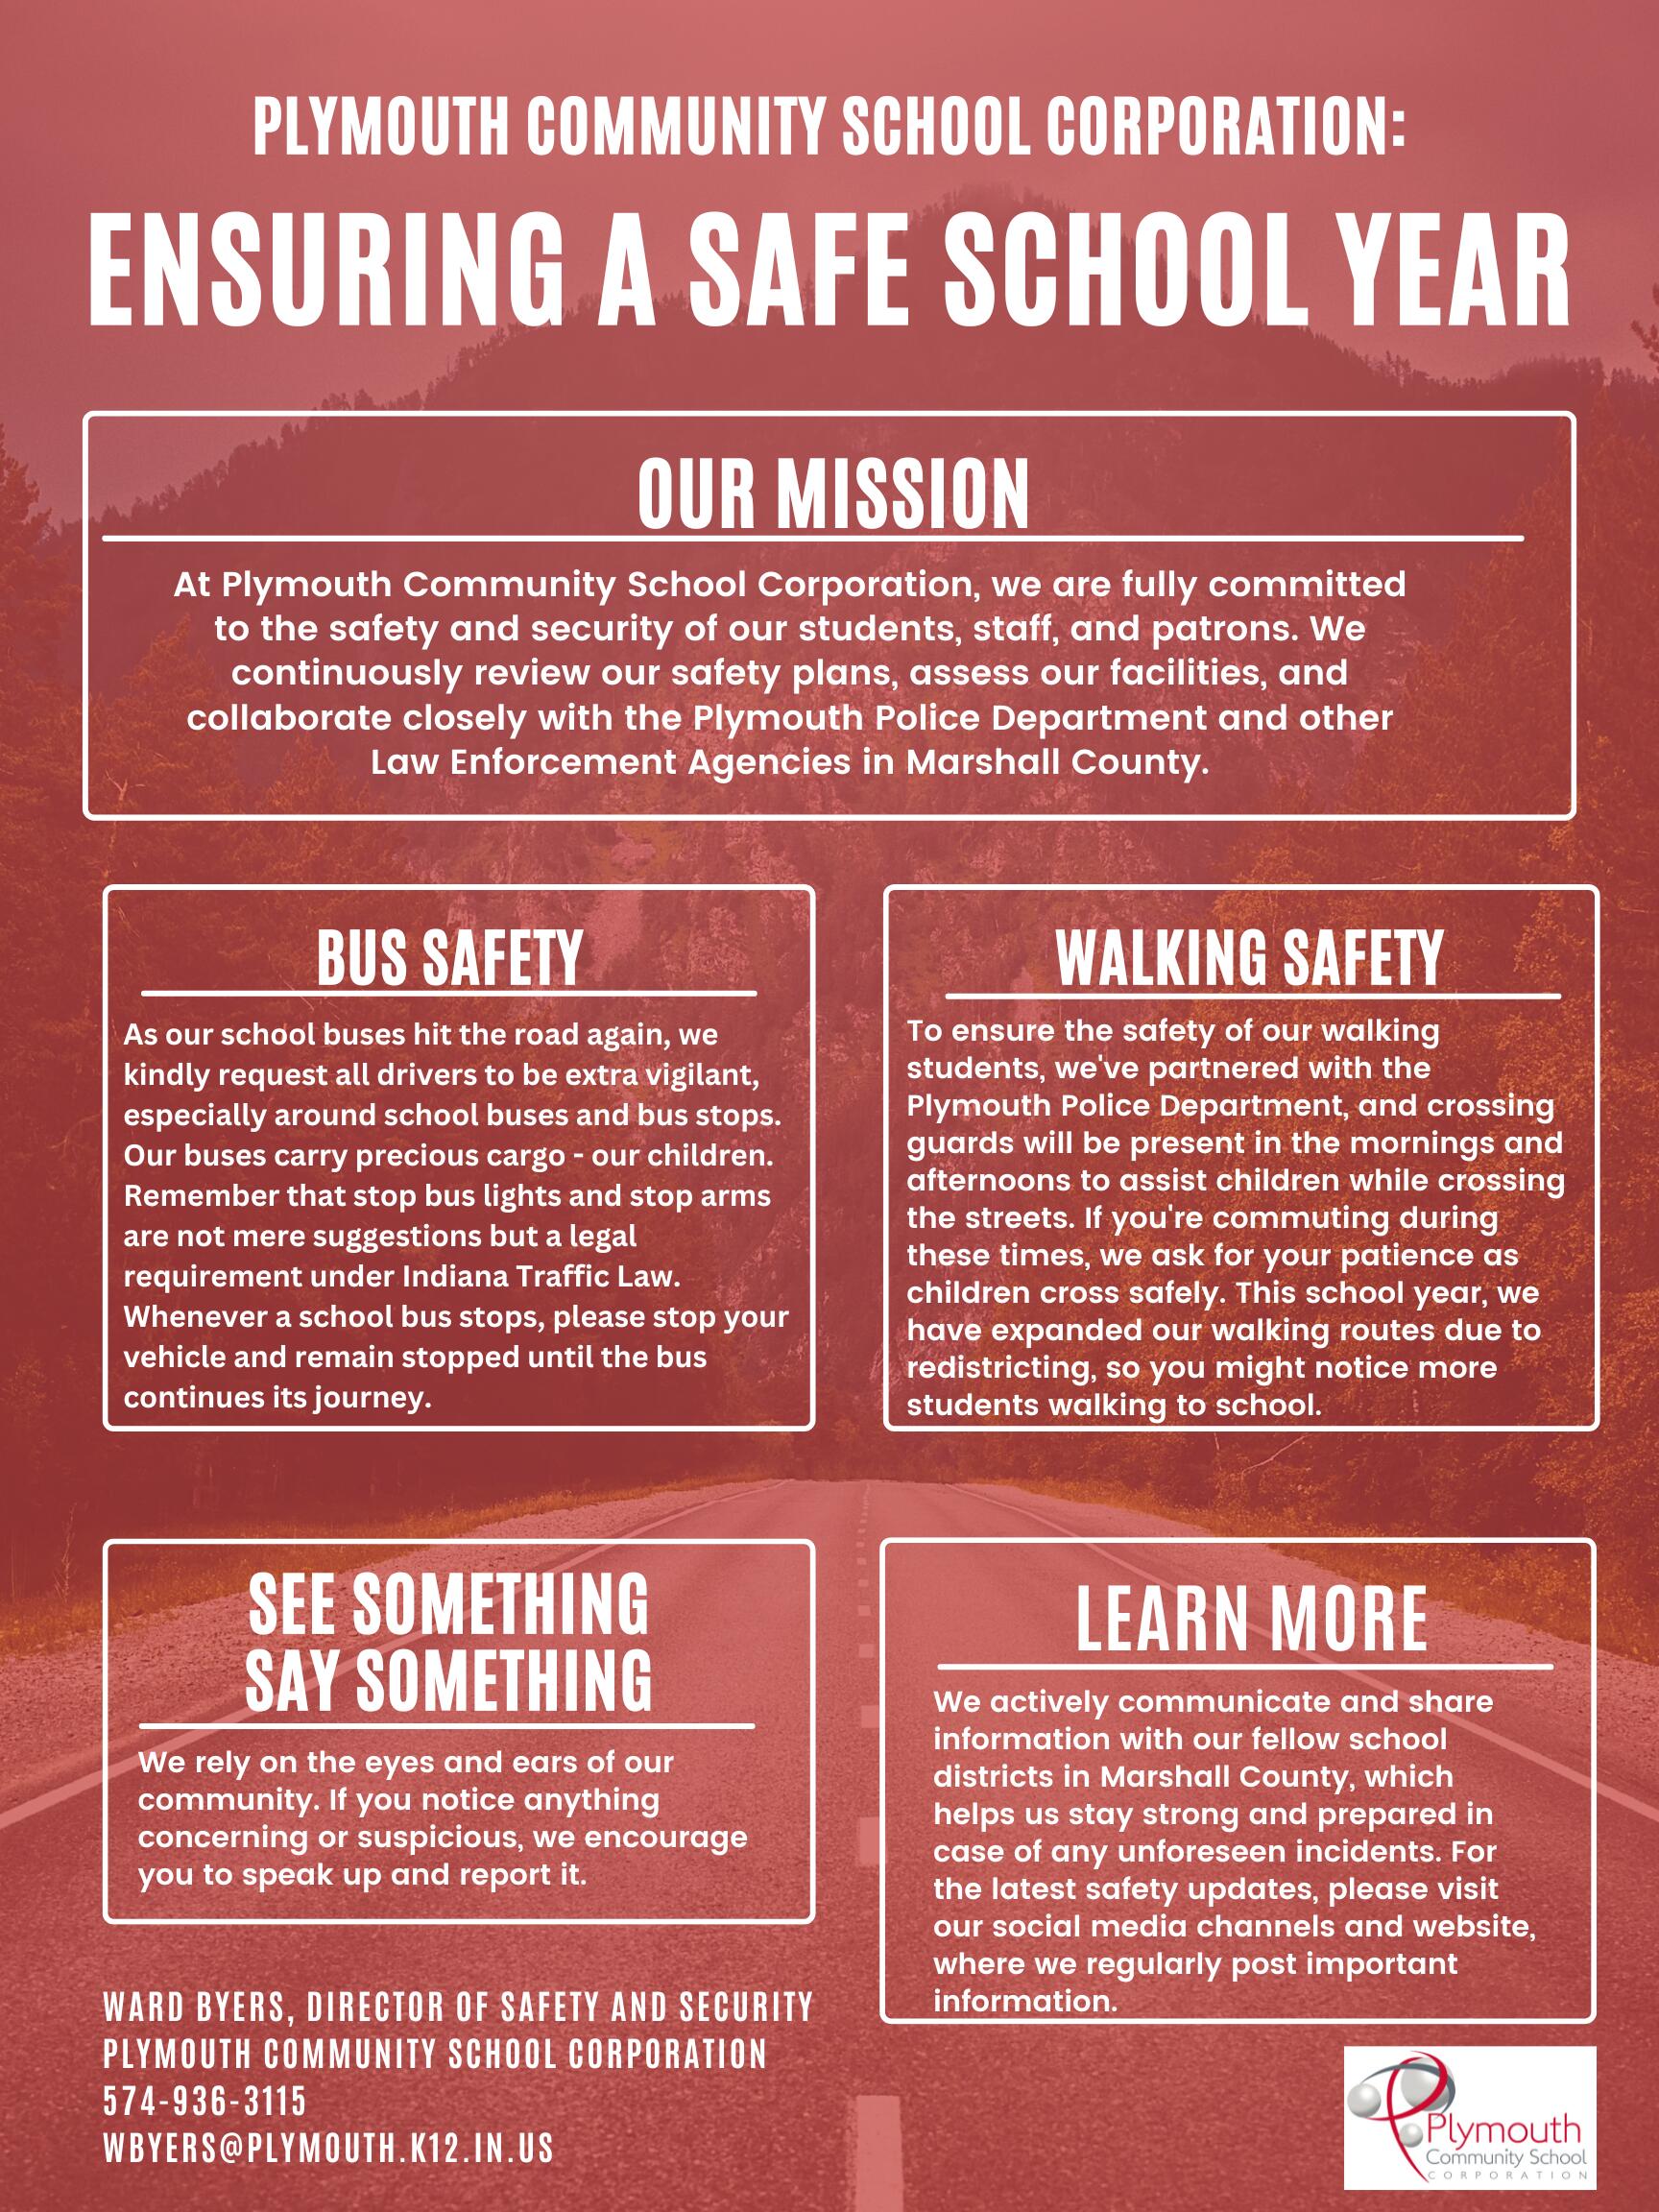 School Safety Poster stating the mission of keeping students and staff safe in collaboration with plymouth fire department and plymouth police, bus safety, walking safety and ety, see something say something and Ward Byer's contact info.